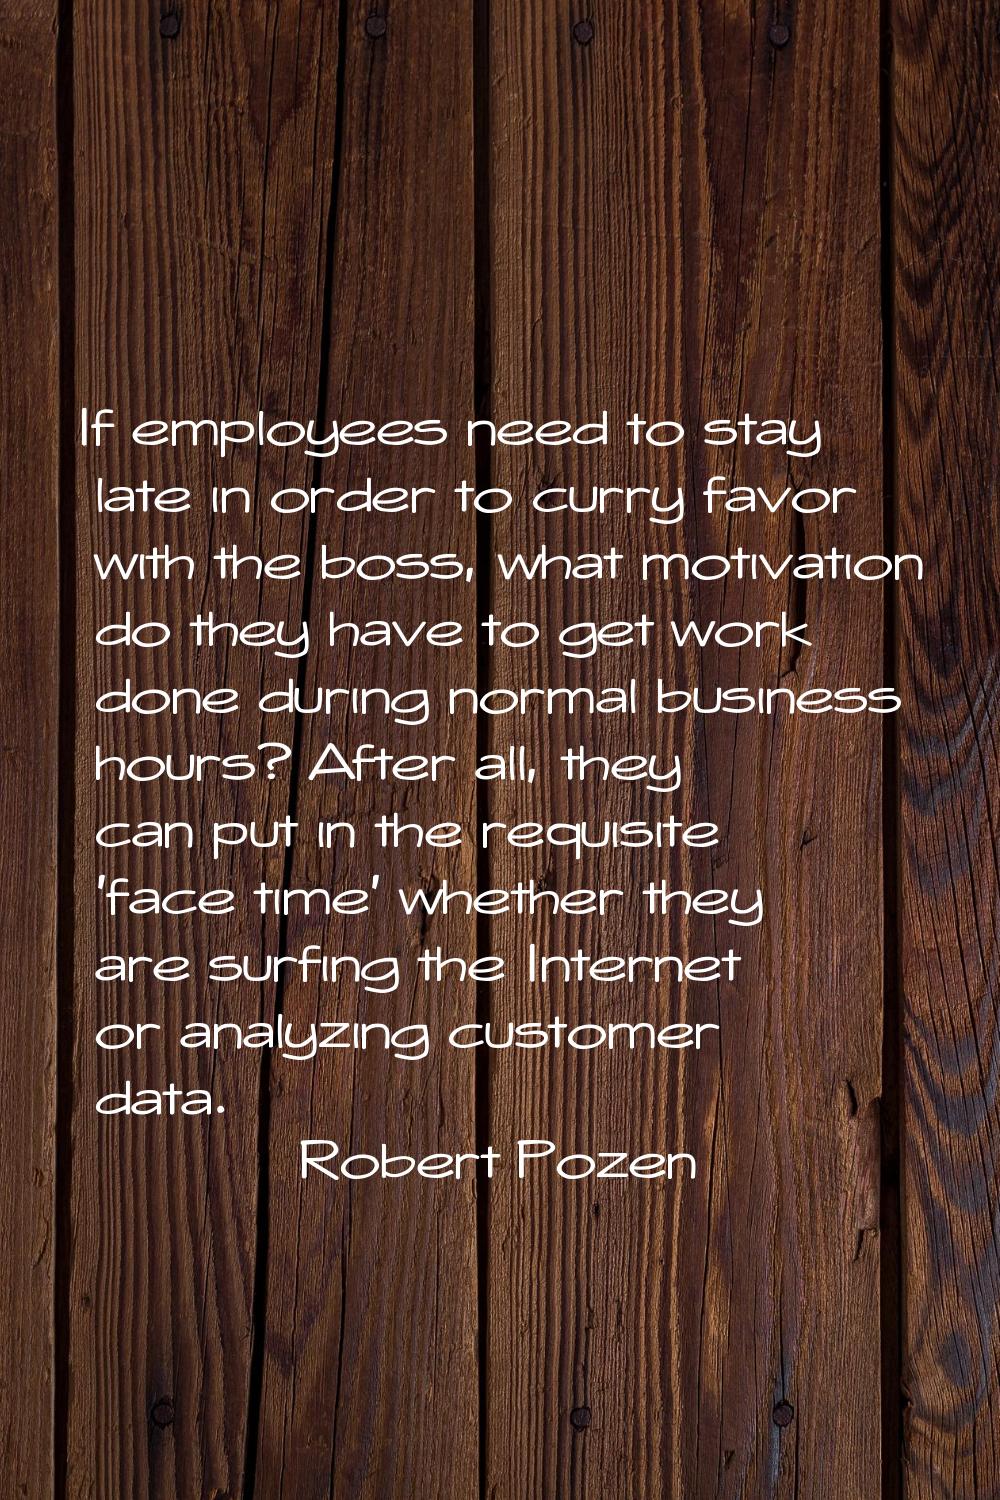 If employees need to stay late in order to curry favor with the boss, what motivation do they have 